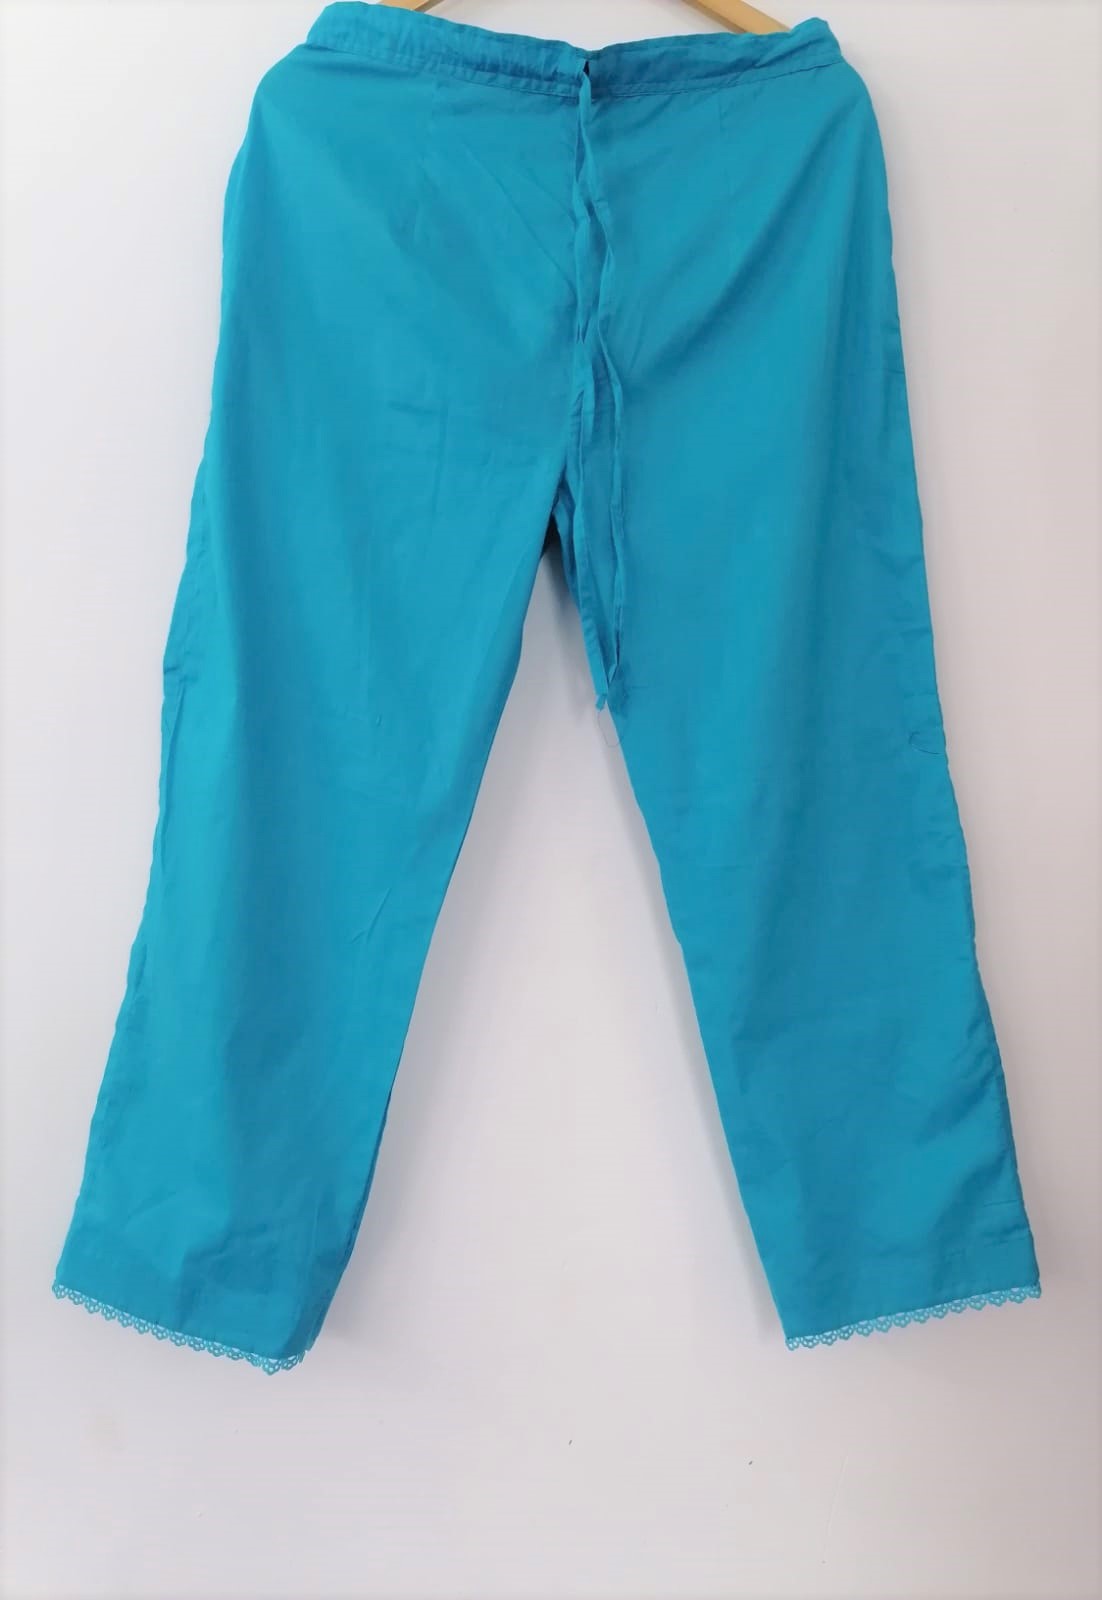 Solid Blue Pants with lace – Sandlore Clothing And Lifetsyle